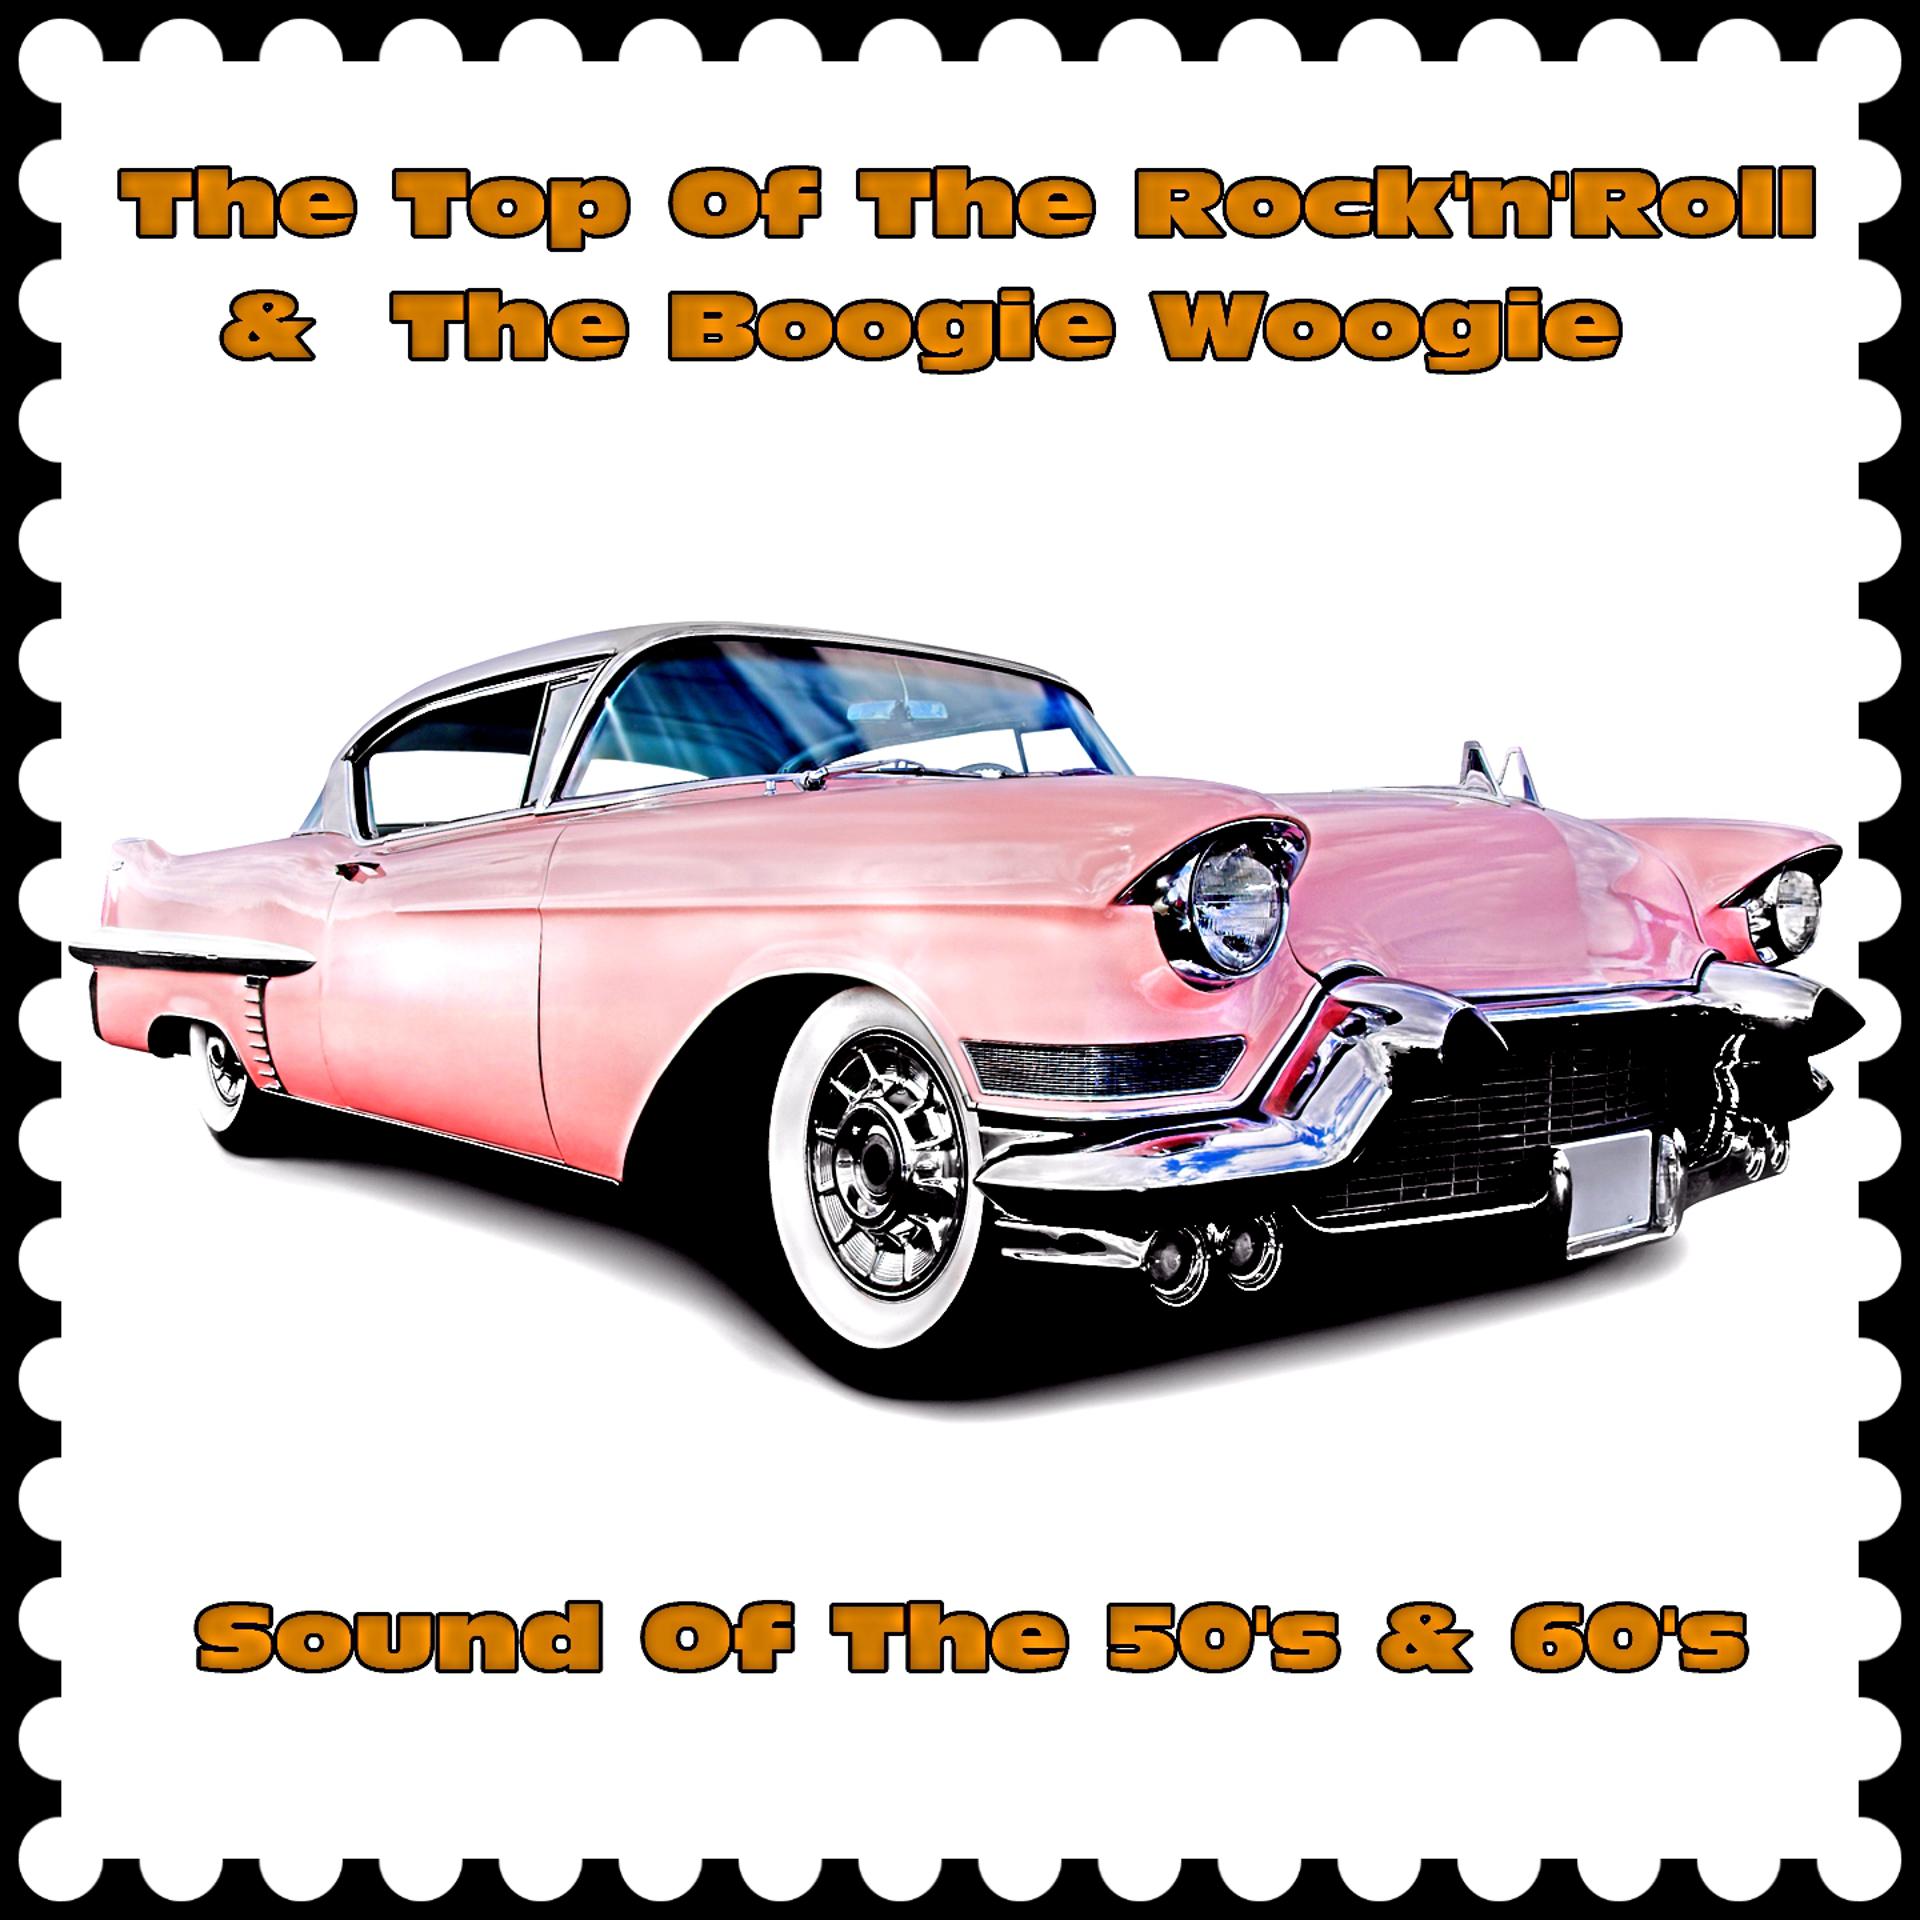 Постер альбома The Top of the Rock'n'roll & the Boogie Woogie